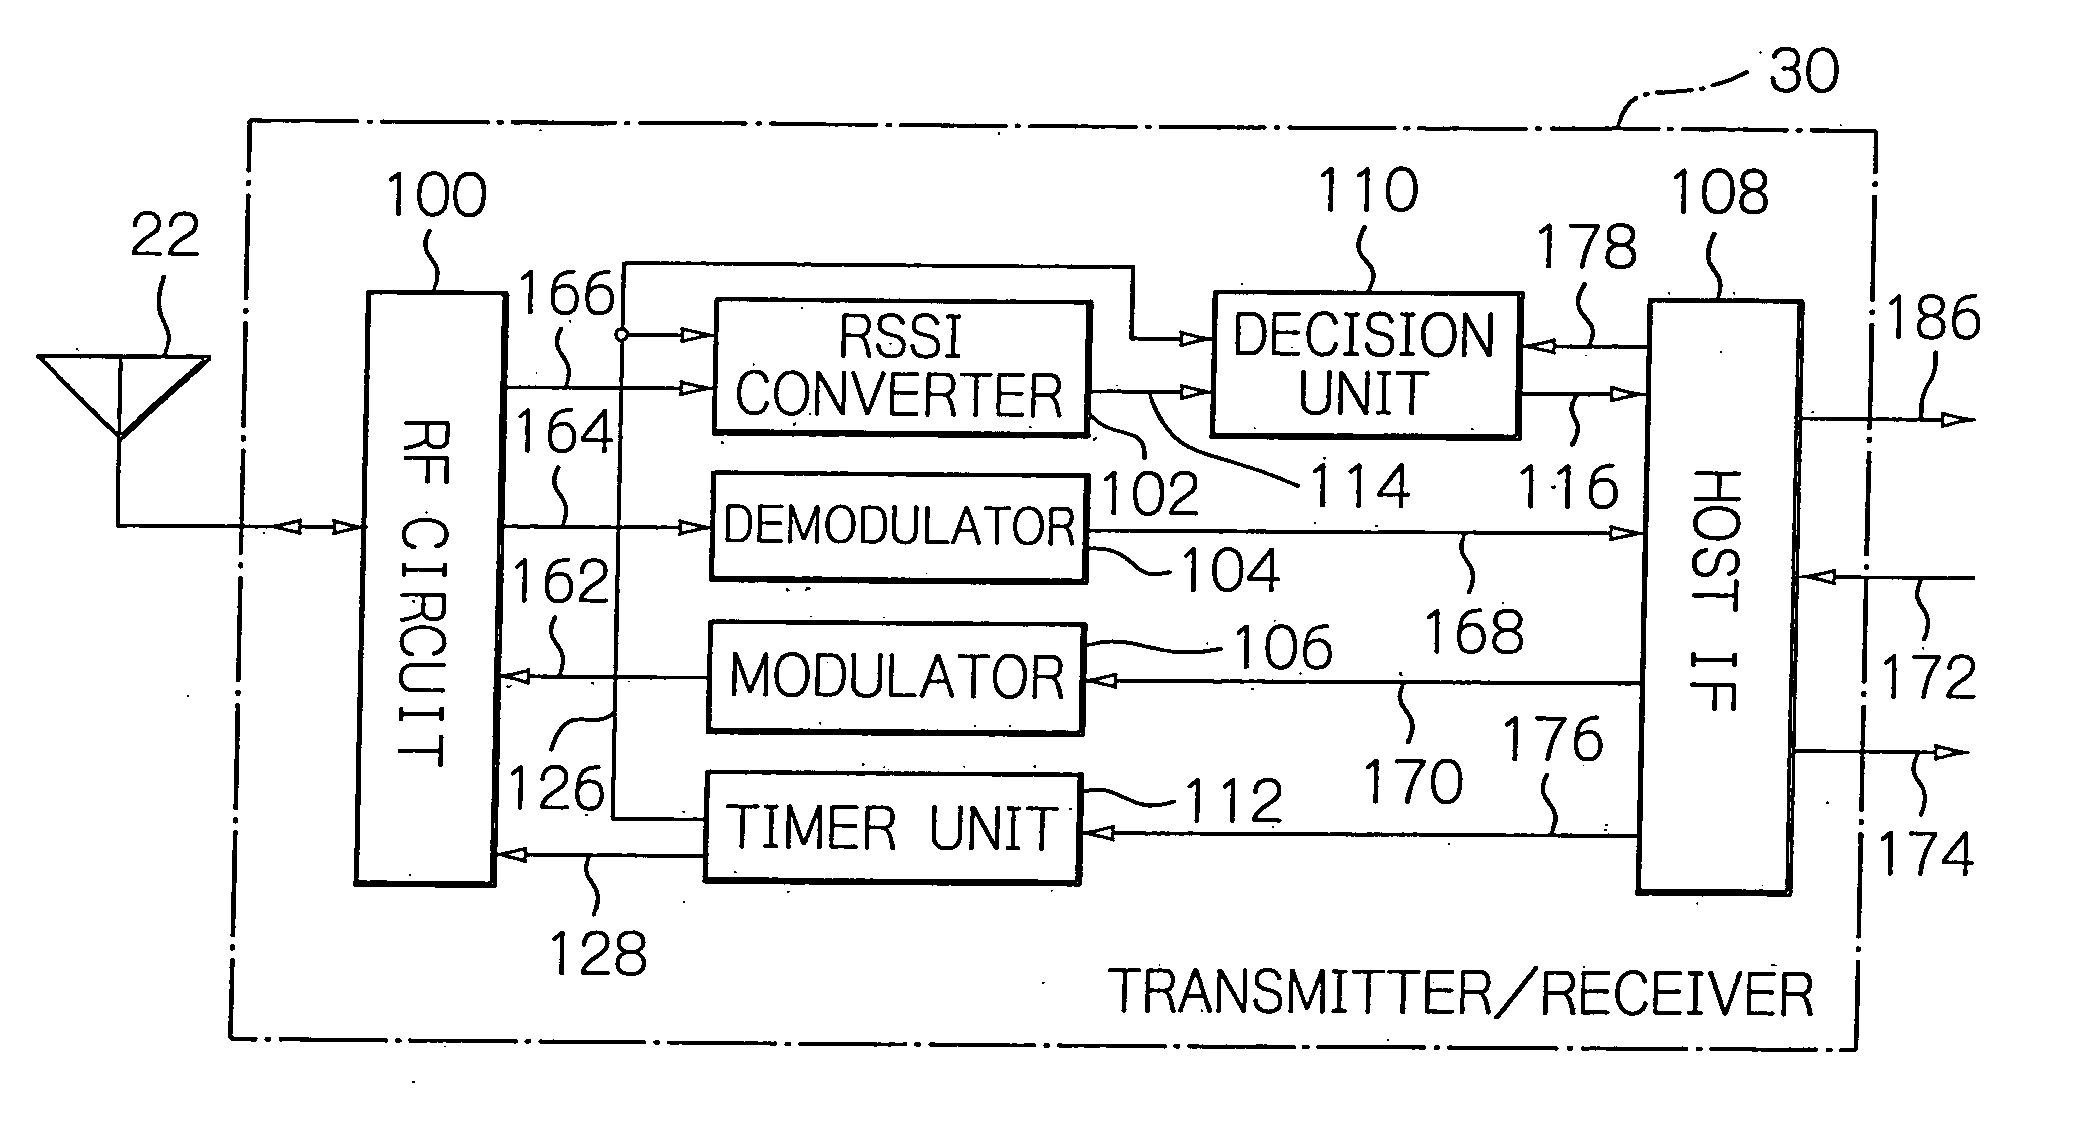 Wireless communications apparatus made operative in dependent upon a received signal strength